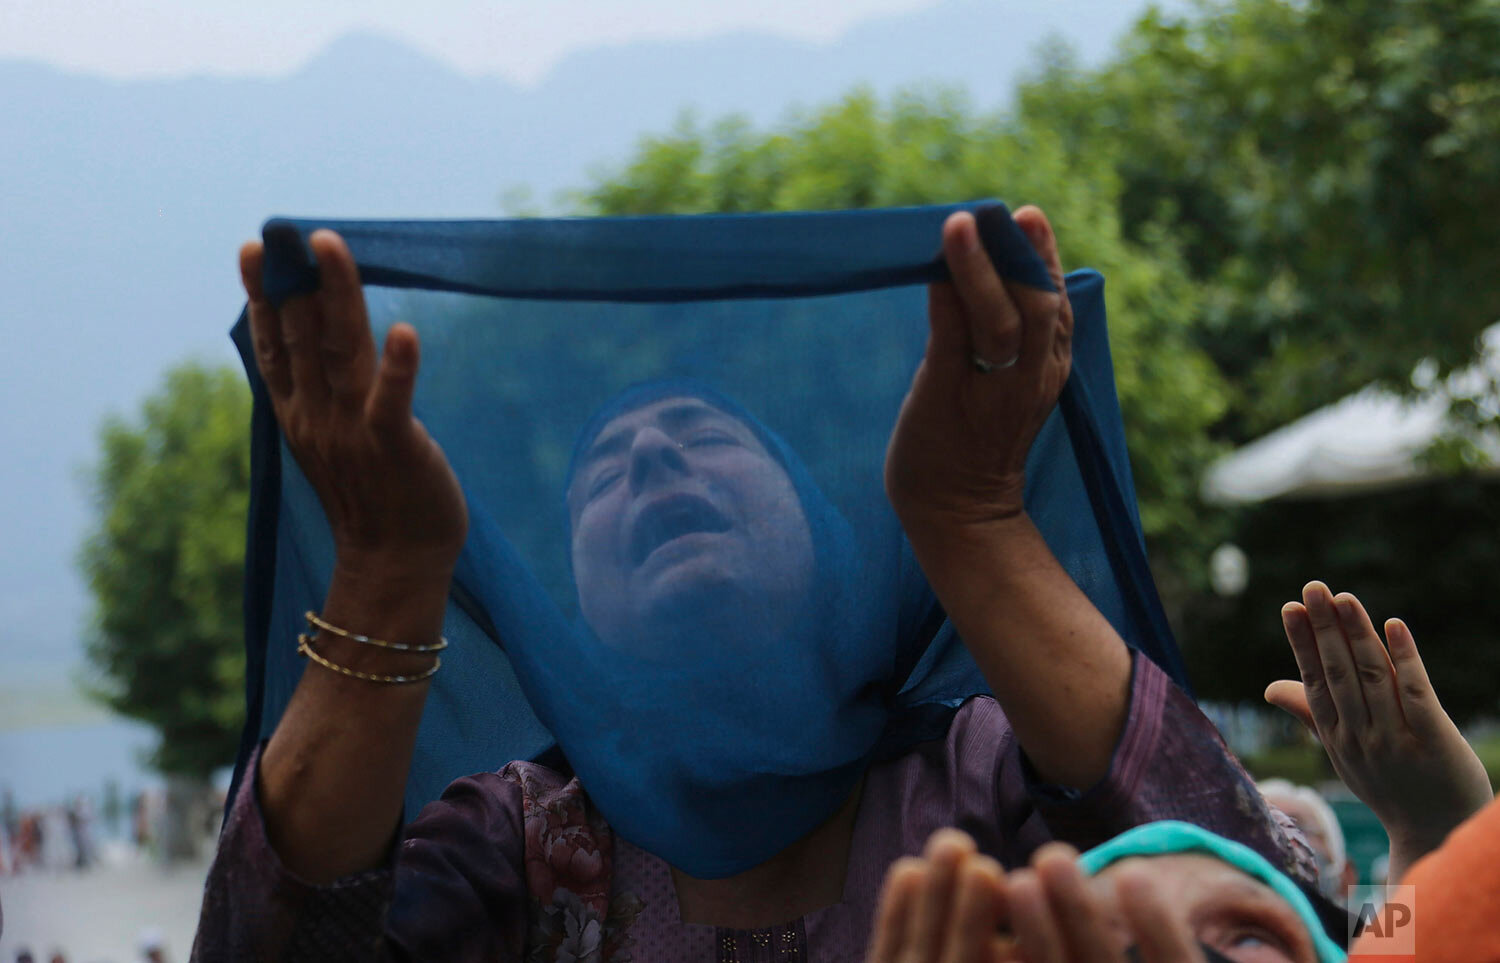  Kashmiri Muslims raise their hands and pray as the head priest, unseen, displays a relic believed to be a hair from the beard of the Prophet Mohammad during special prayers to observe the Martyr Day of second Khalifa of Islam Hazrat Umar-e- Farooq, 